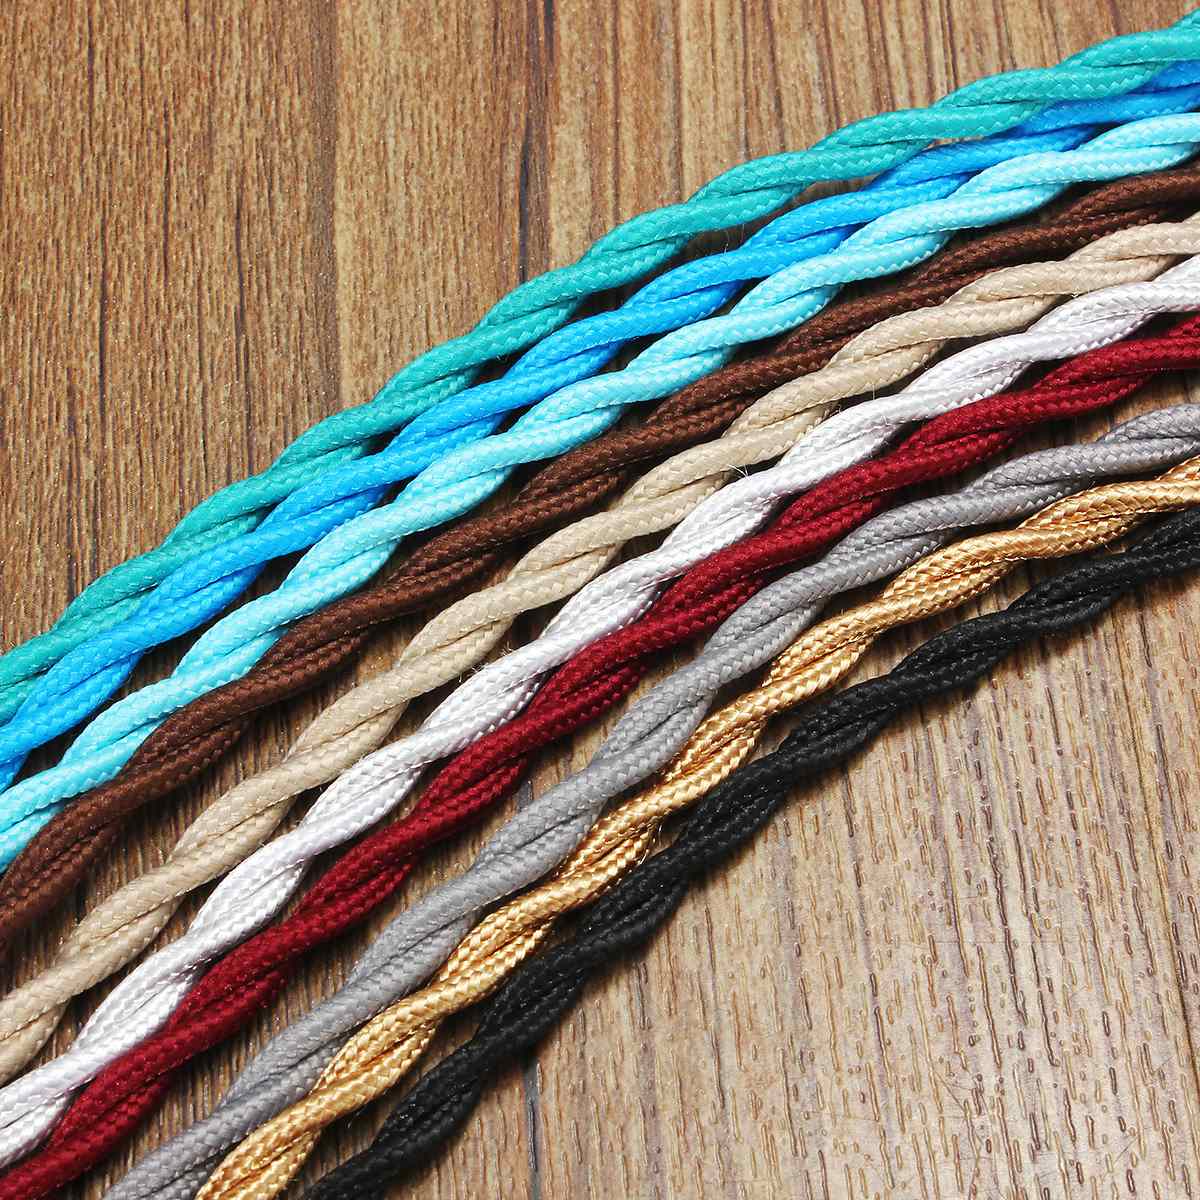 10 Amazing Braided Electrical Wire for 2023